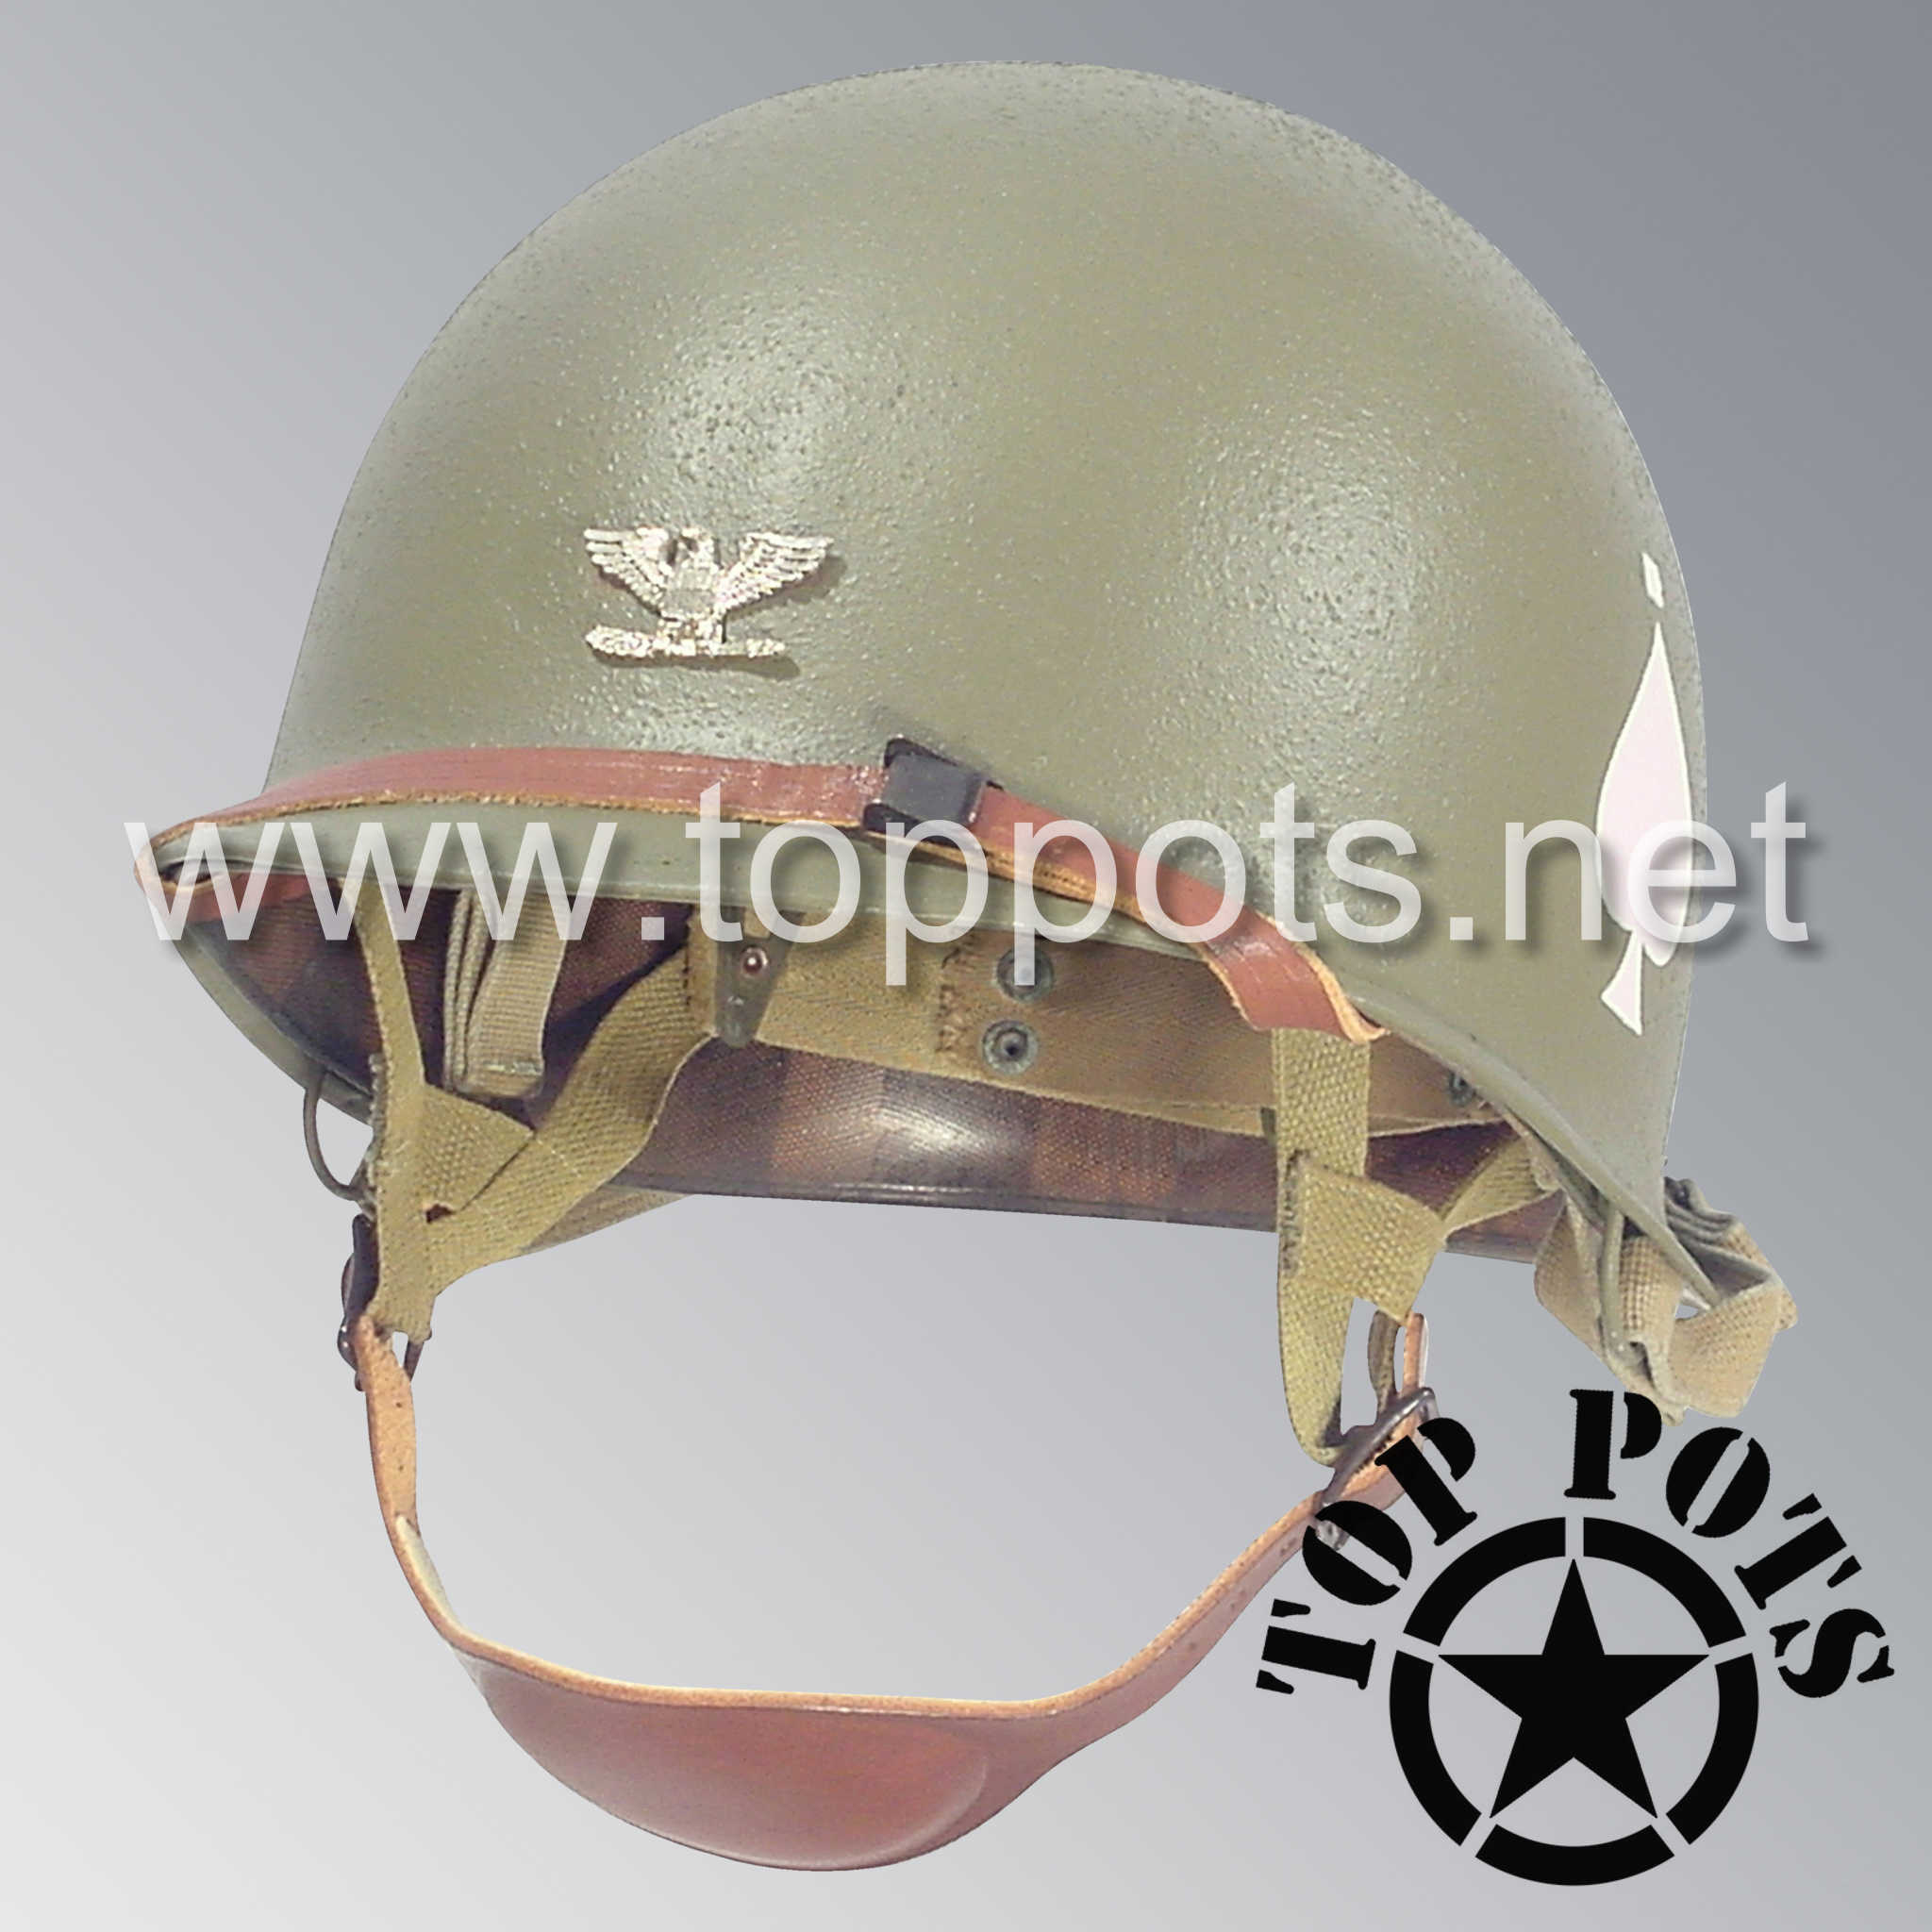 Wwii Us Army Restored Original M2 Paratrooper Airborne Helmet D Bale S -  Top Pots - Wwii Us M-1 Helmets, Liners And Reproduction Uniform Sales